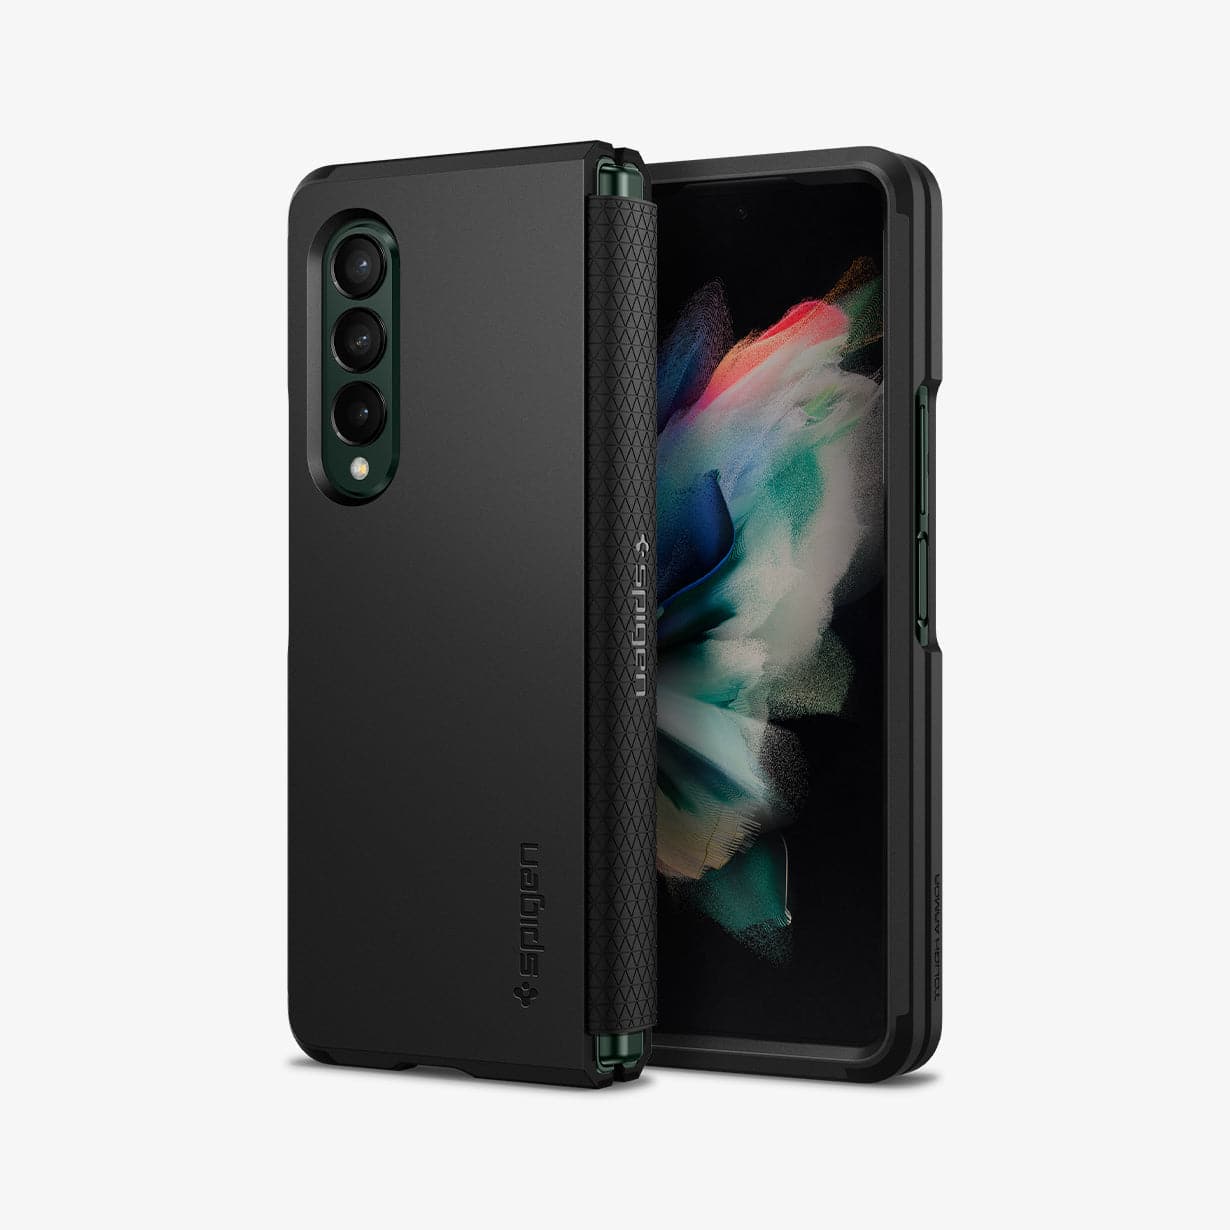 ACS03077 - Galaxy Z Fold 3 Case Tough Armor in black showing the front and back with device closed